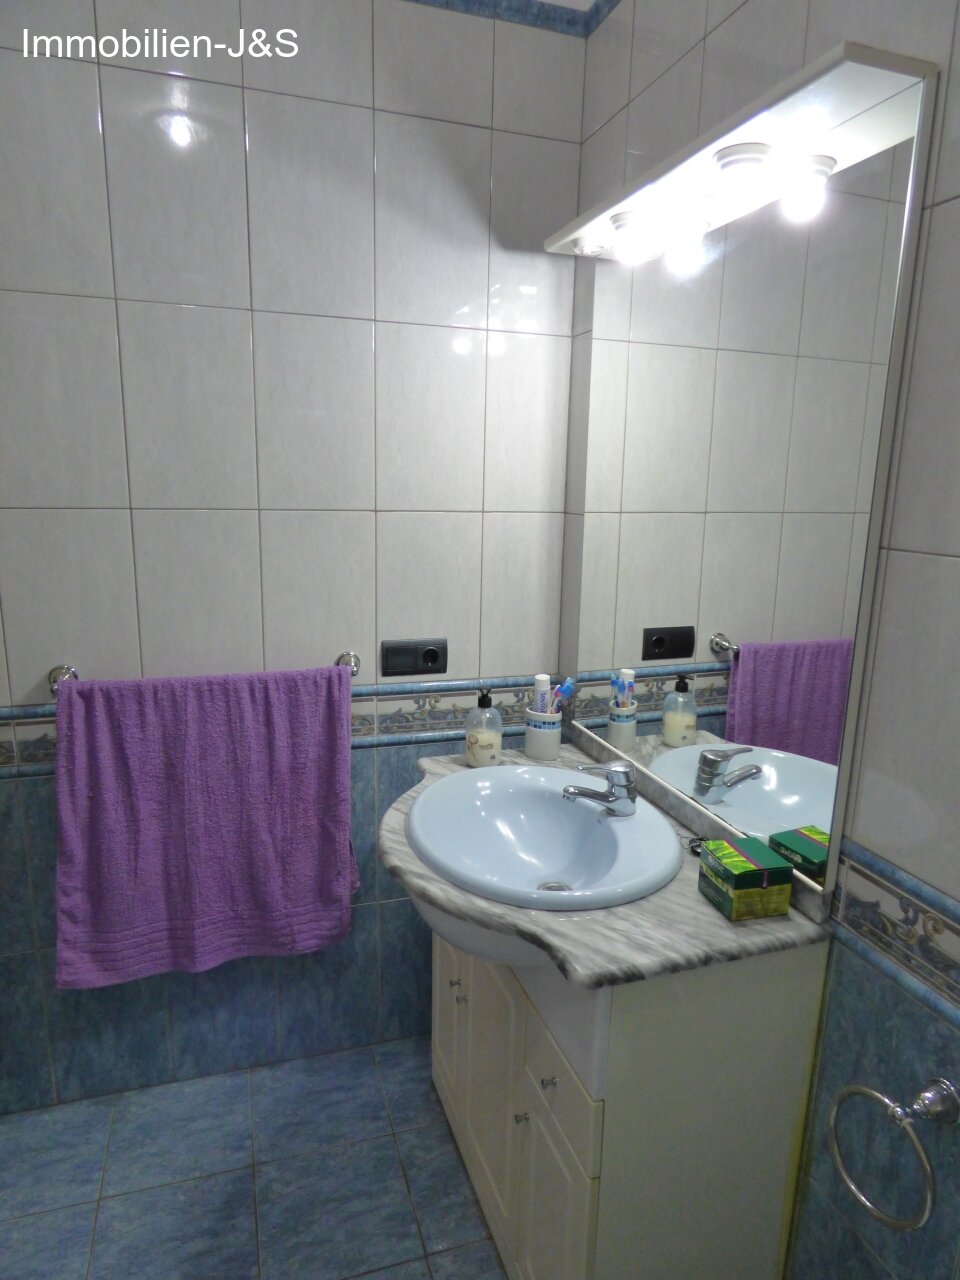 Bathroom upstairs with shower